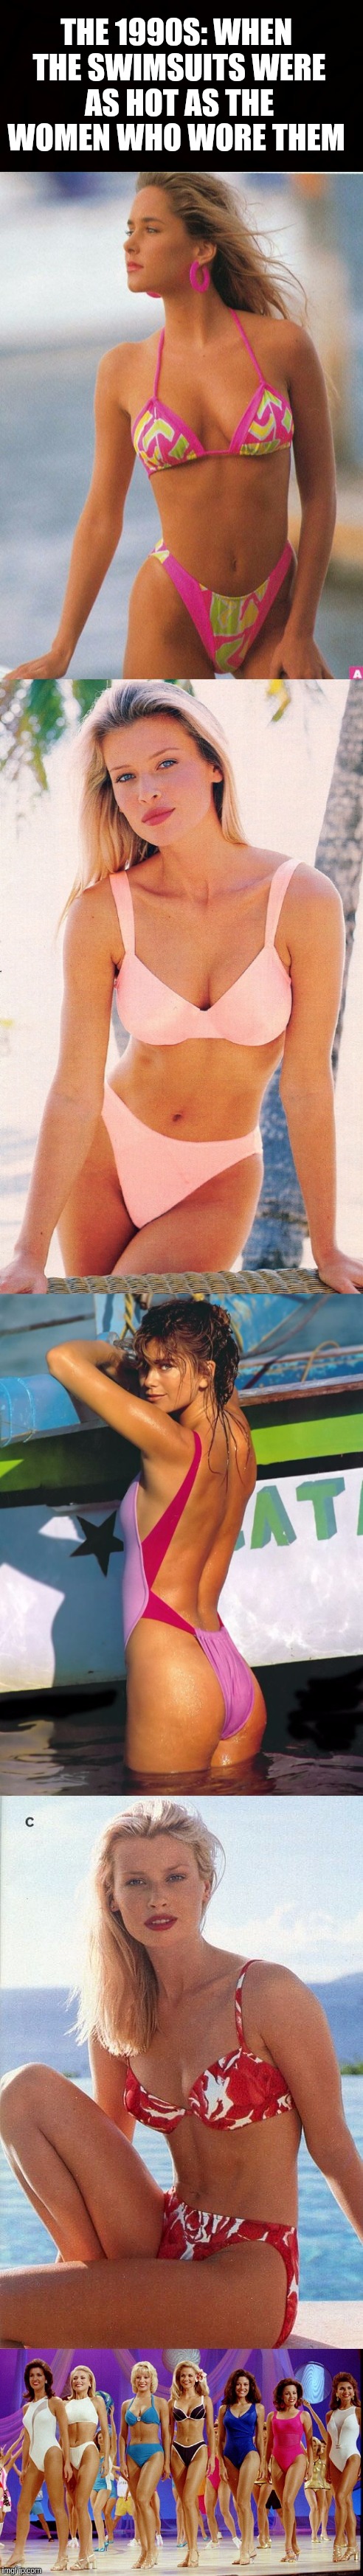 No better decade for beautiful women in amazing swimsuits!  | THE 1990S: WHEN THE SWIMSUITS WERE AS HOT AS THE WOMEN WHO WORE THEM | image tagged in jbmemegeek,bikini week,swimsuit,sexy women,1990's | made w/ Imgflip meme maker